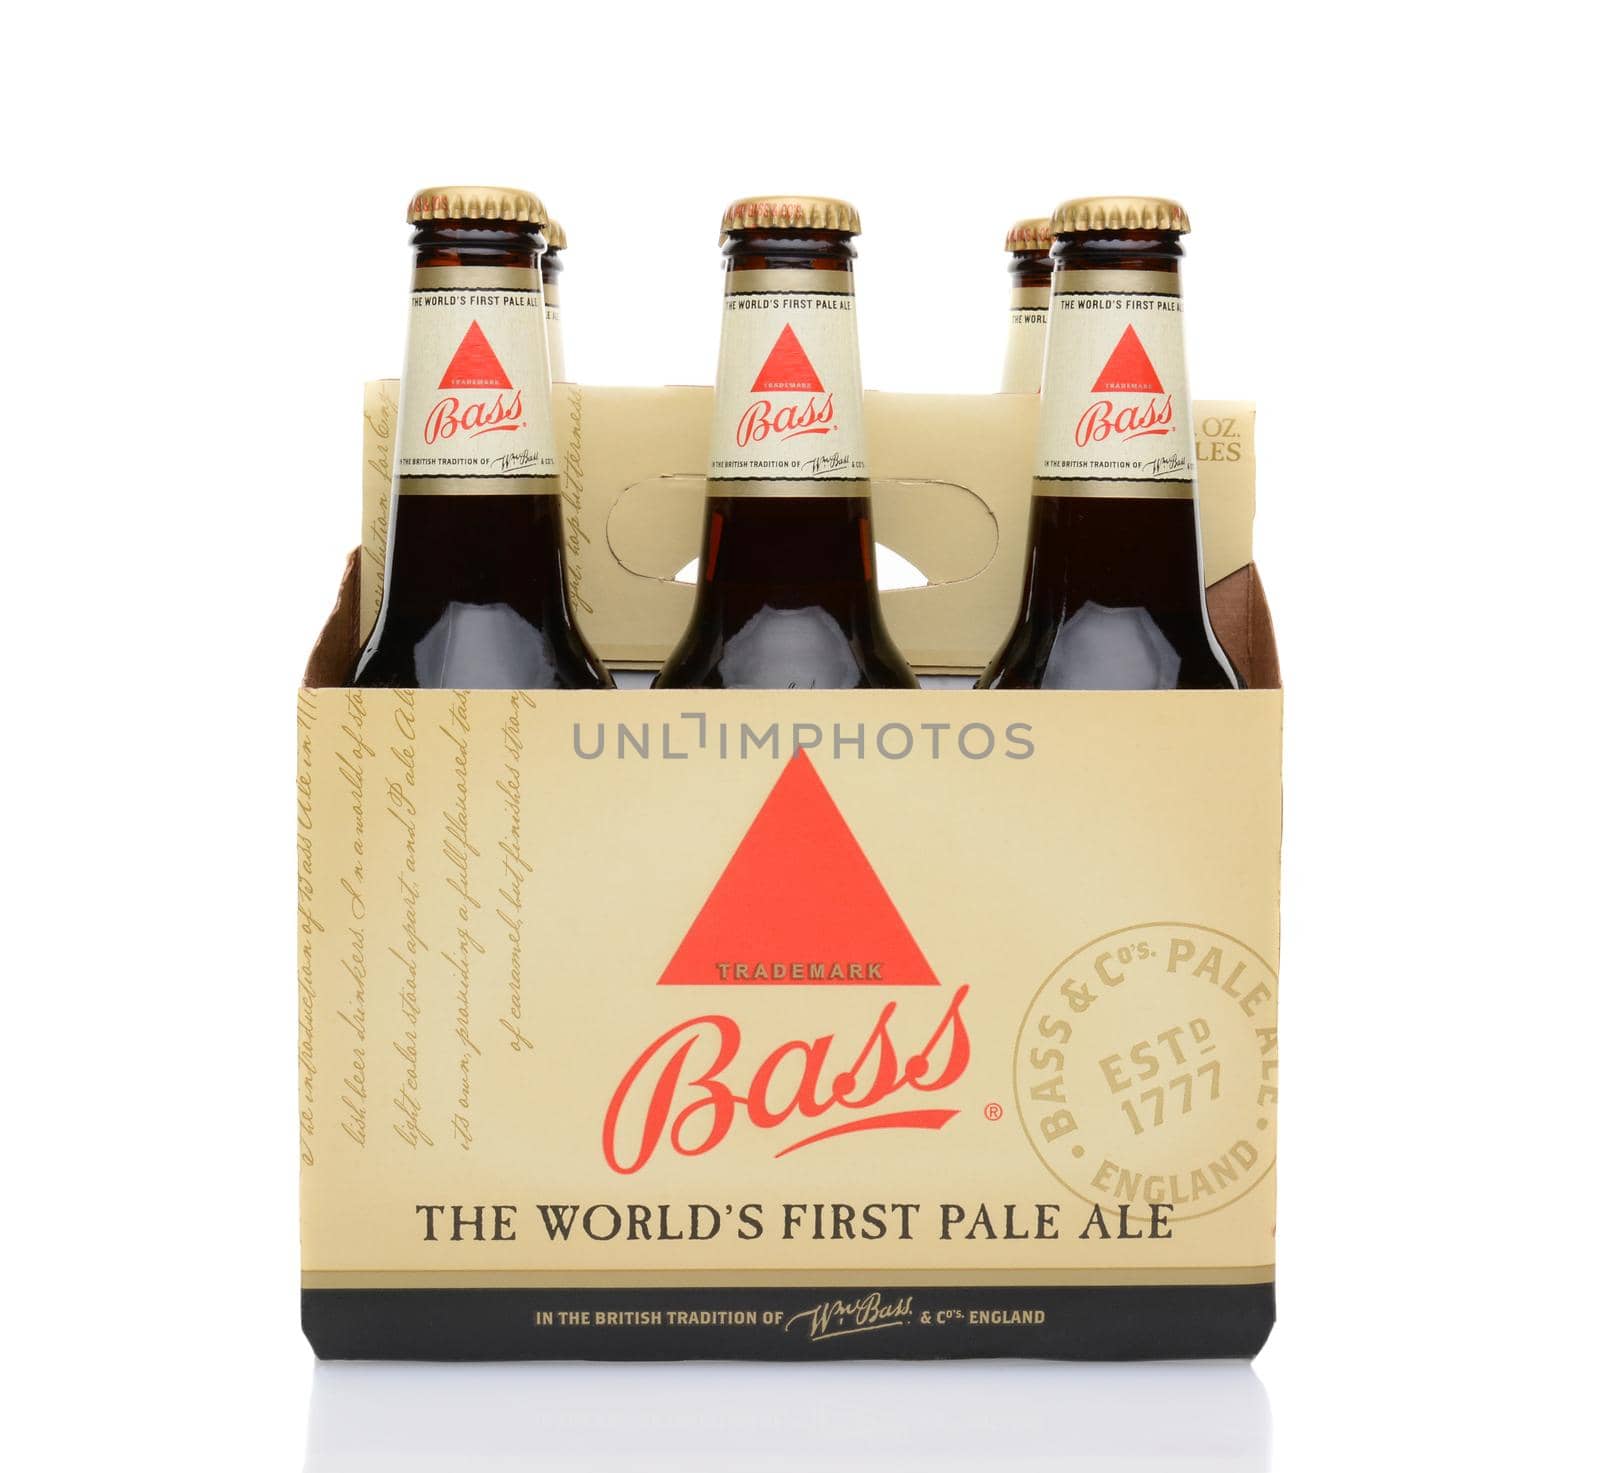 IRVINE, CA - MAY 25, 2014: A 6 pack of Bass Ale. The Bass Brewery was founded in 1777 by William Bass, in Trent, England is now owned by Anheuser-Busch InBev.